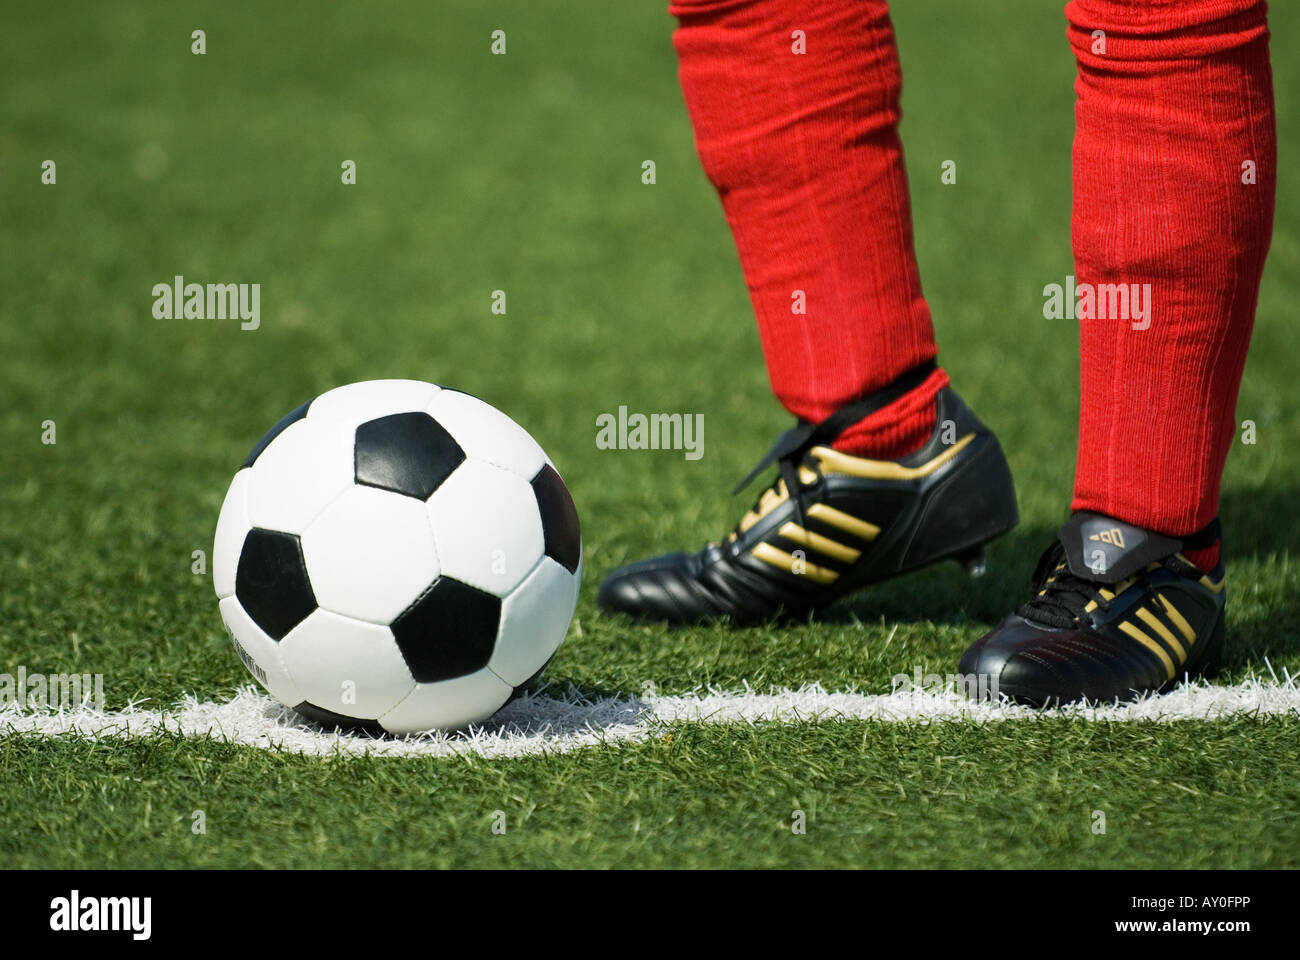 the feet of a football player in red stockings and a vintage black and white football Stock Photo